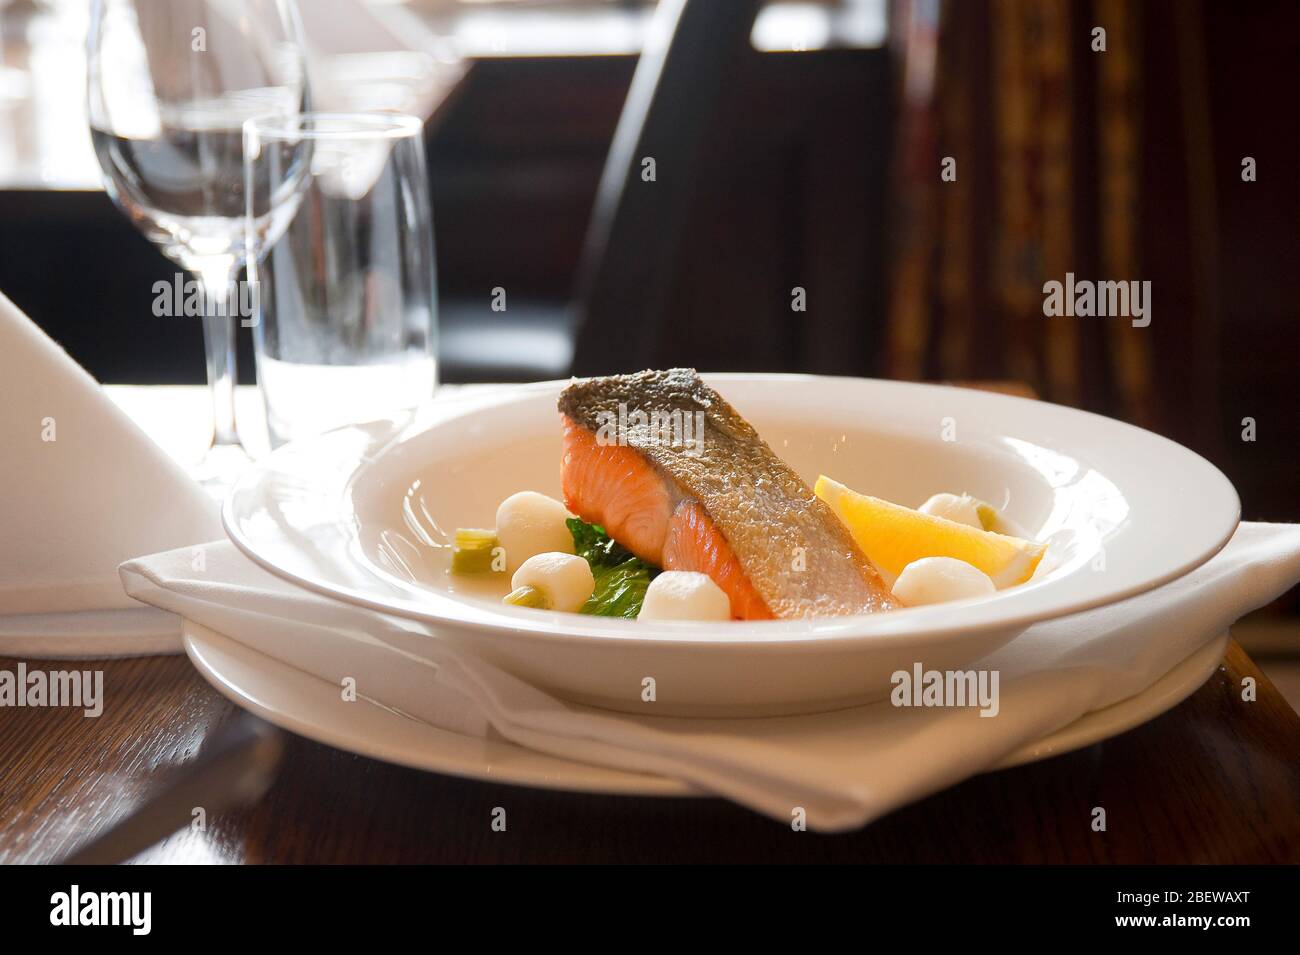 Plated salmon at a restaurant table place setting in fine dining restaurant Stock Photo